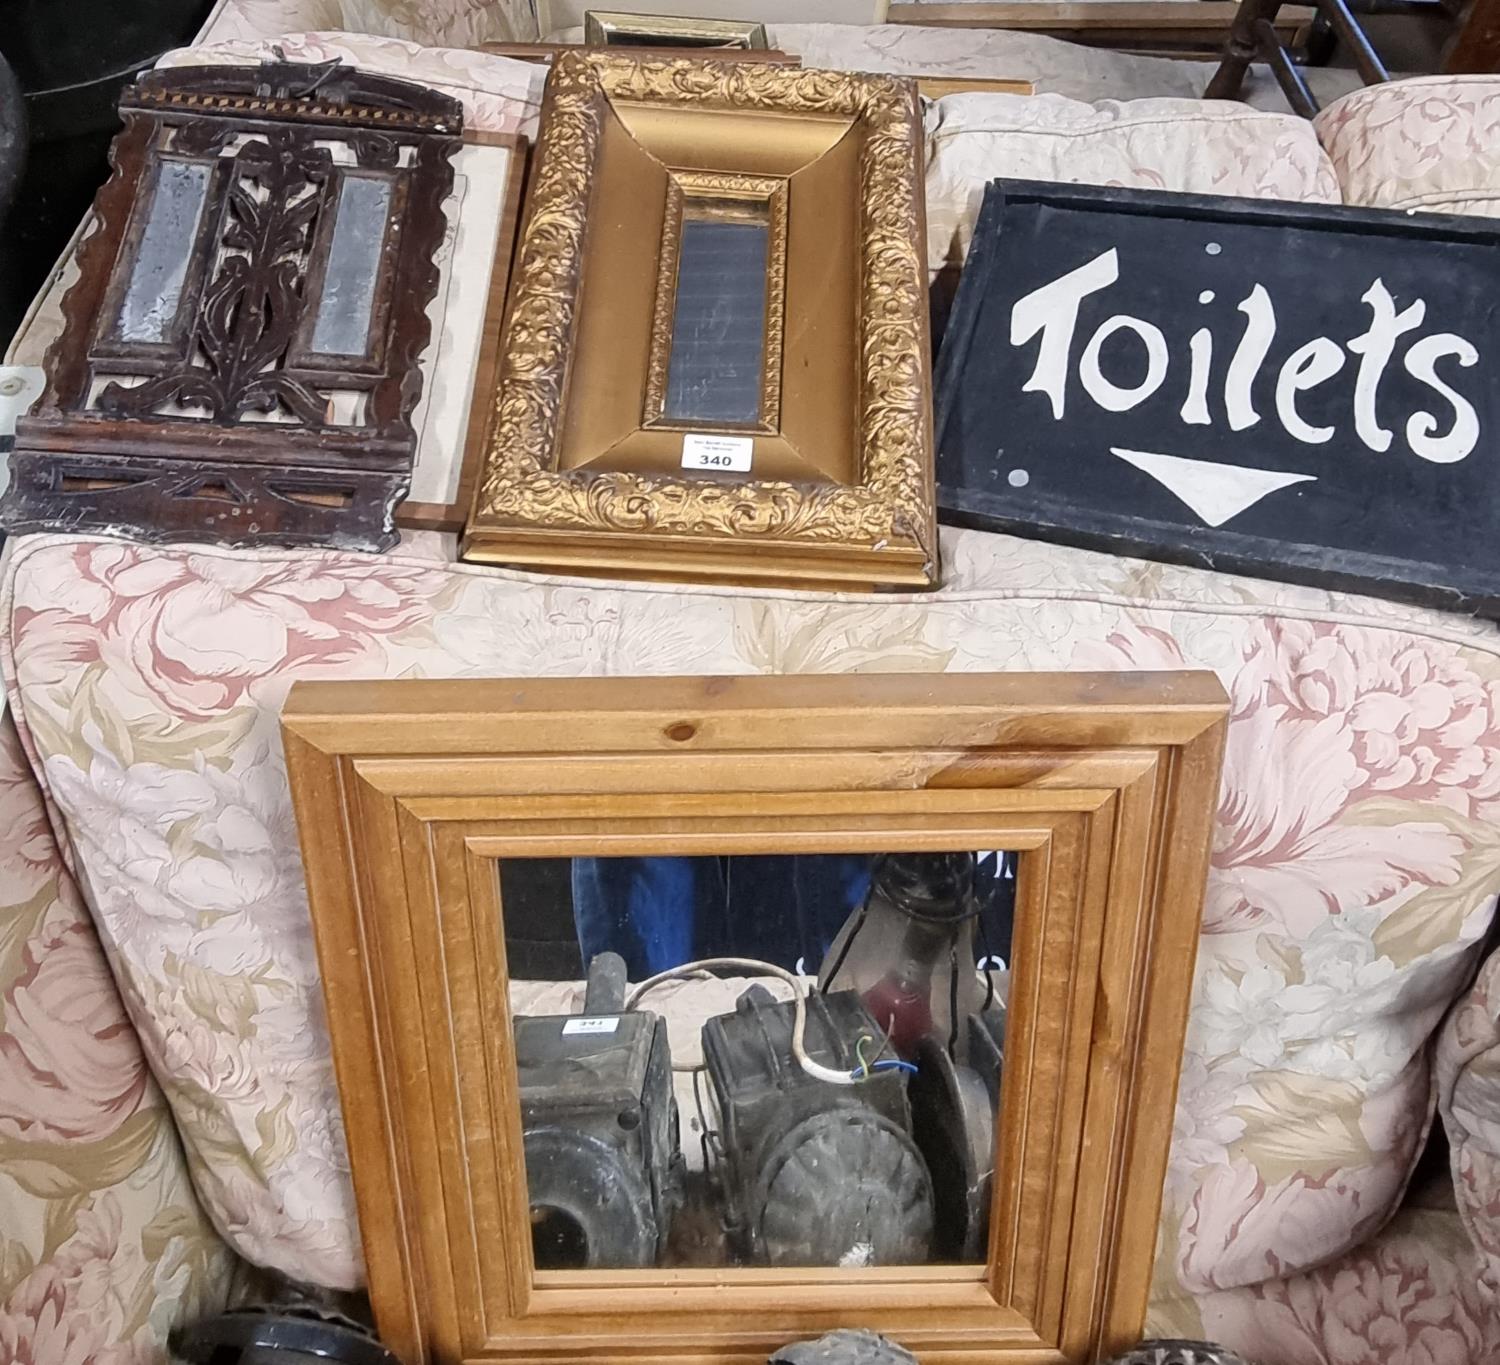 A group of Vintage Mirrors along with an advertisement for toilets. 160 x 90 H 67 cm approx.